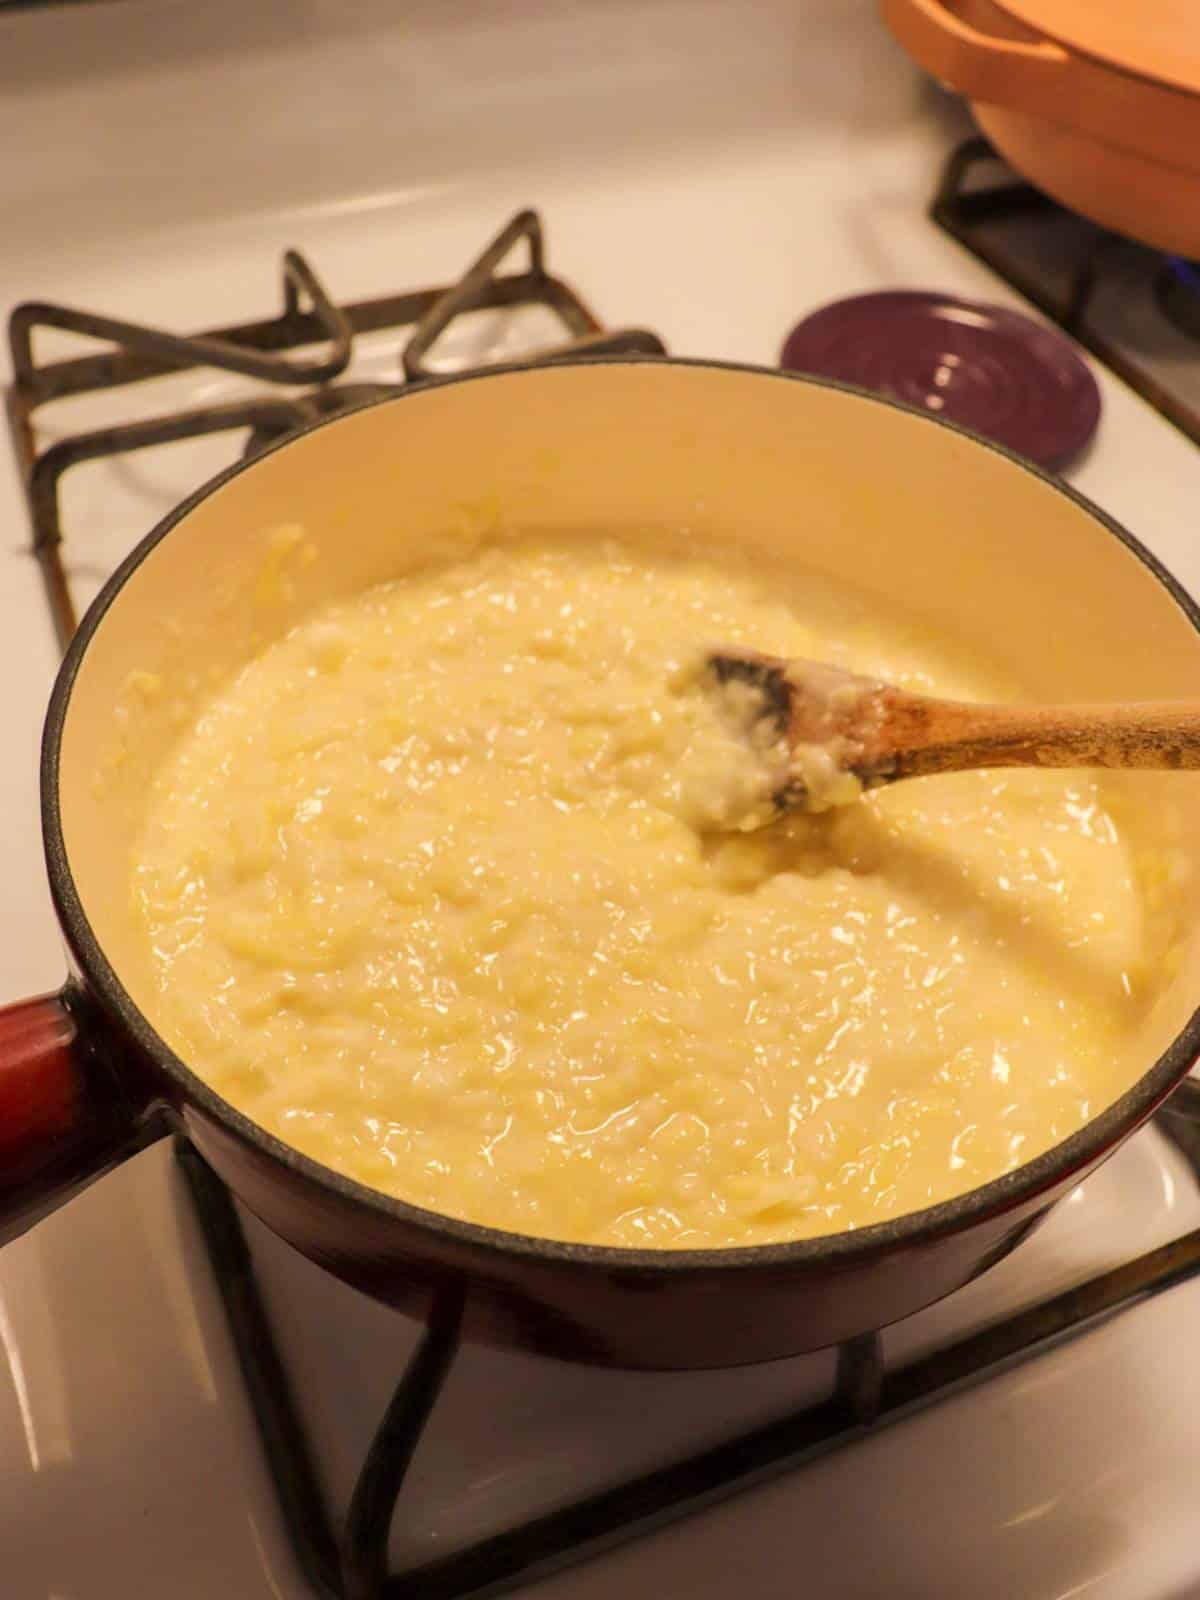 Vegan cheese melting in a fondue pot on the stove with a wooden spoon.